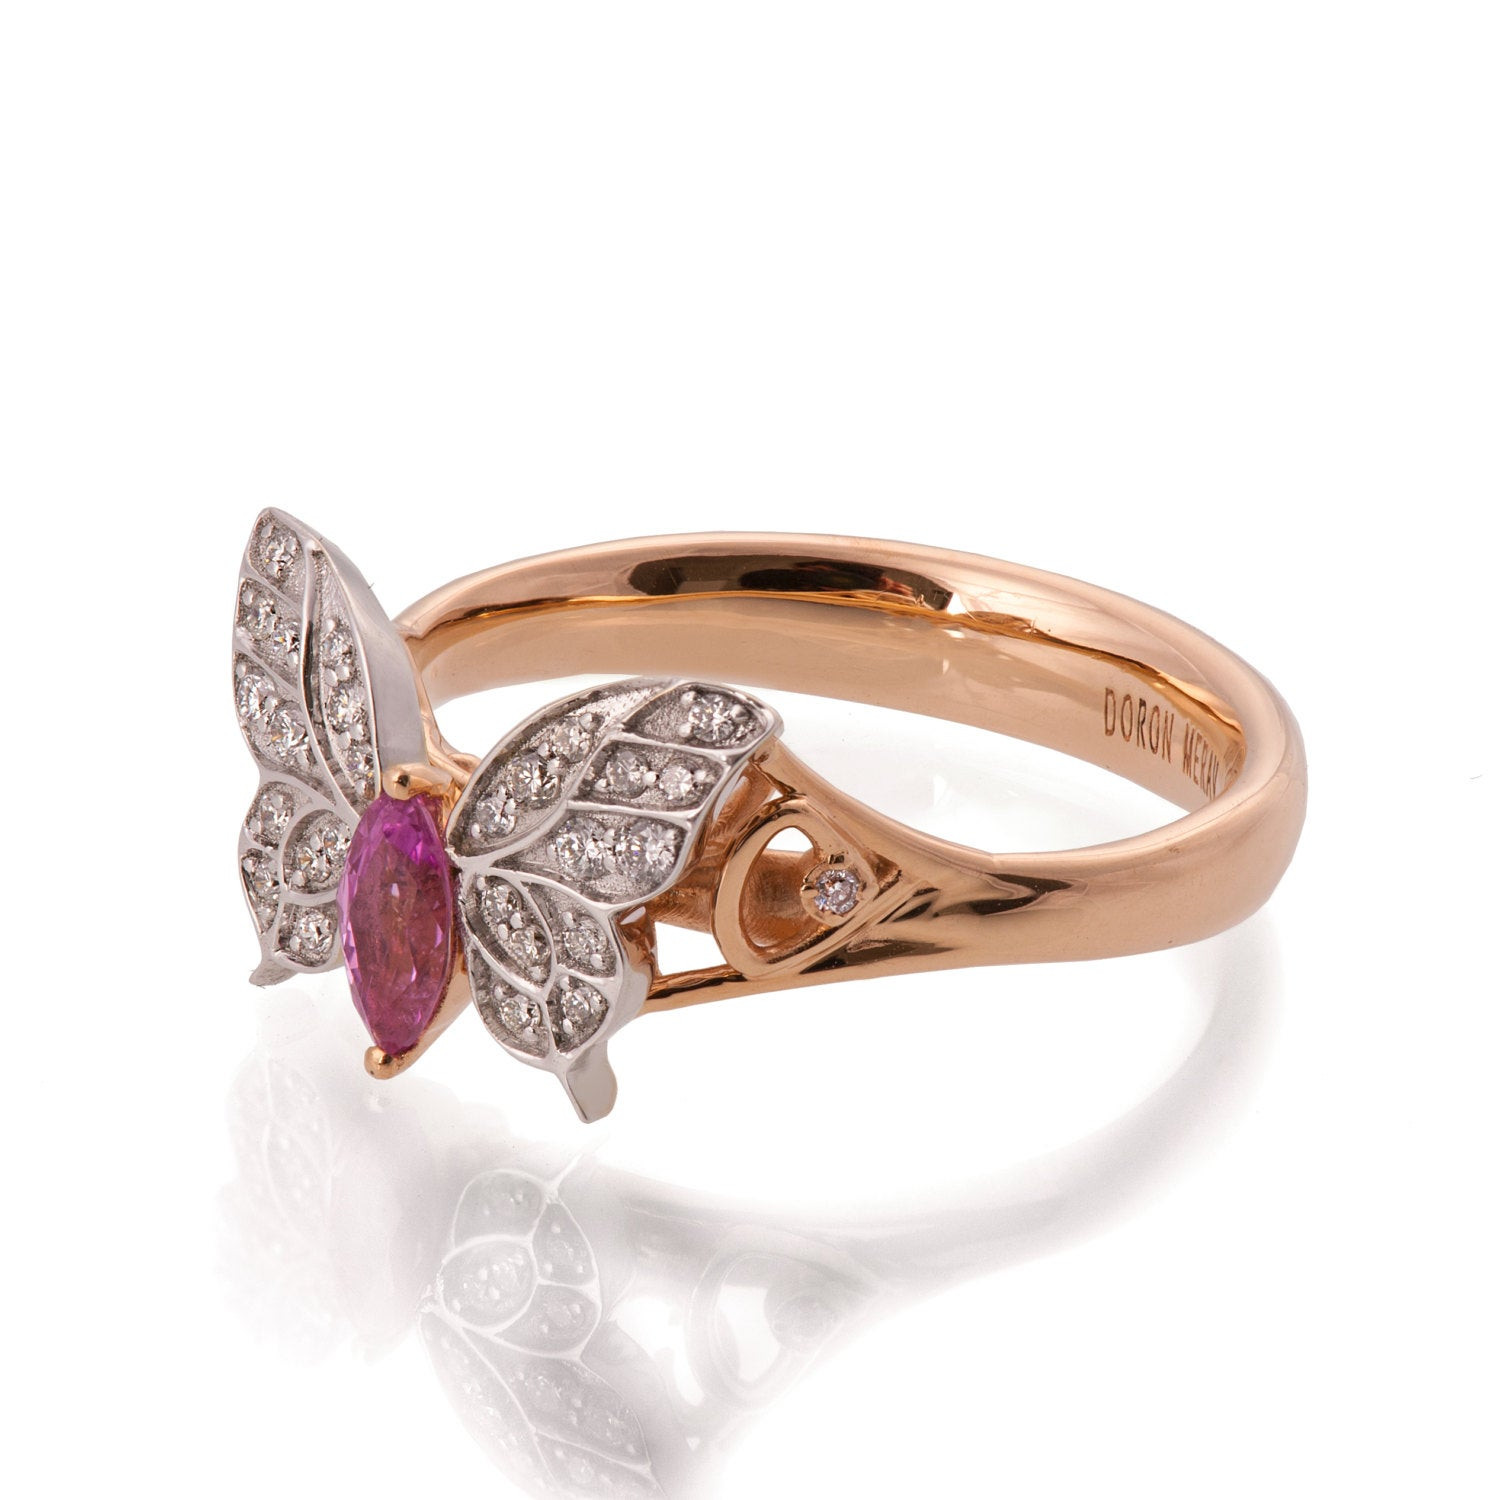 Butterfly Wedding Rings
 Butterfly Engagement Ring 18K Rose Gold and Pink Sapphire